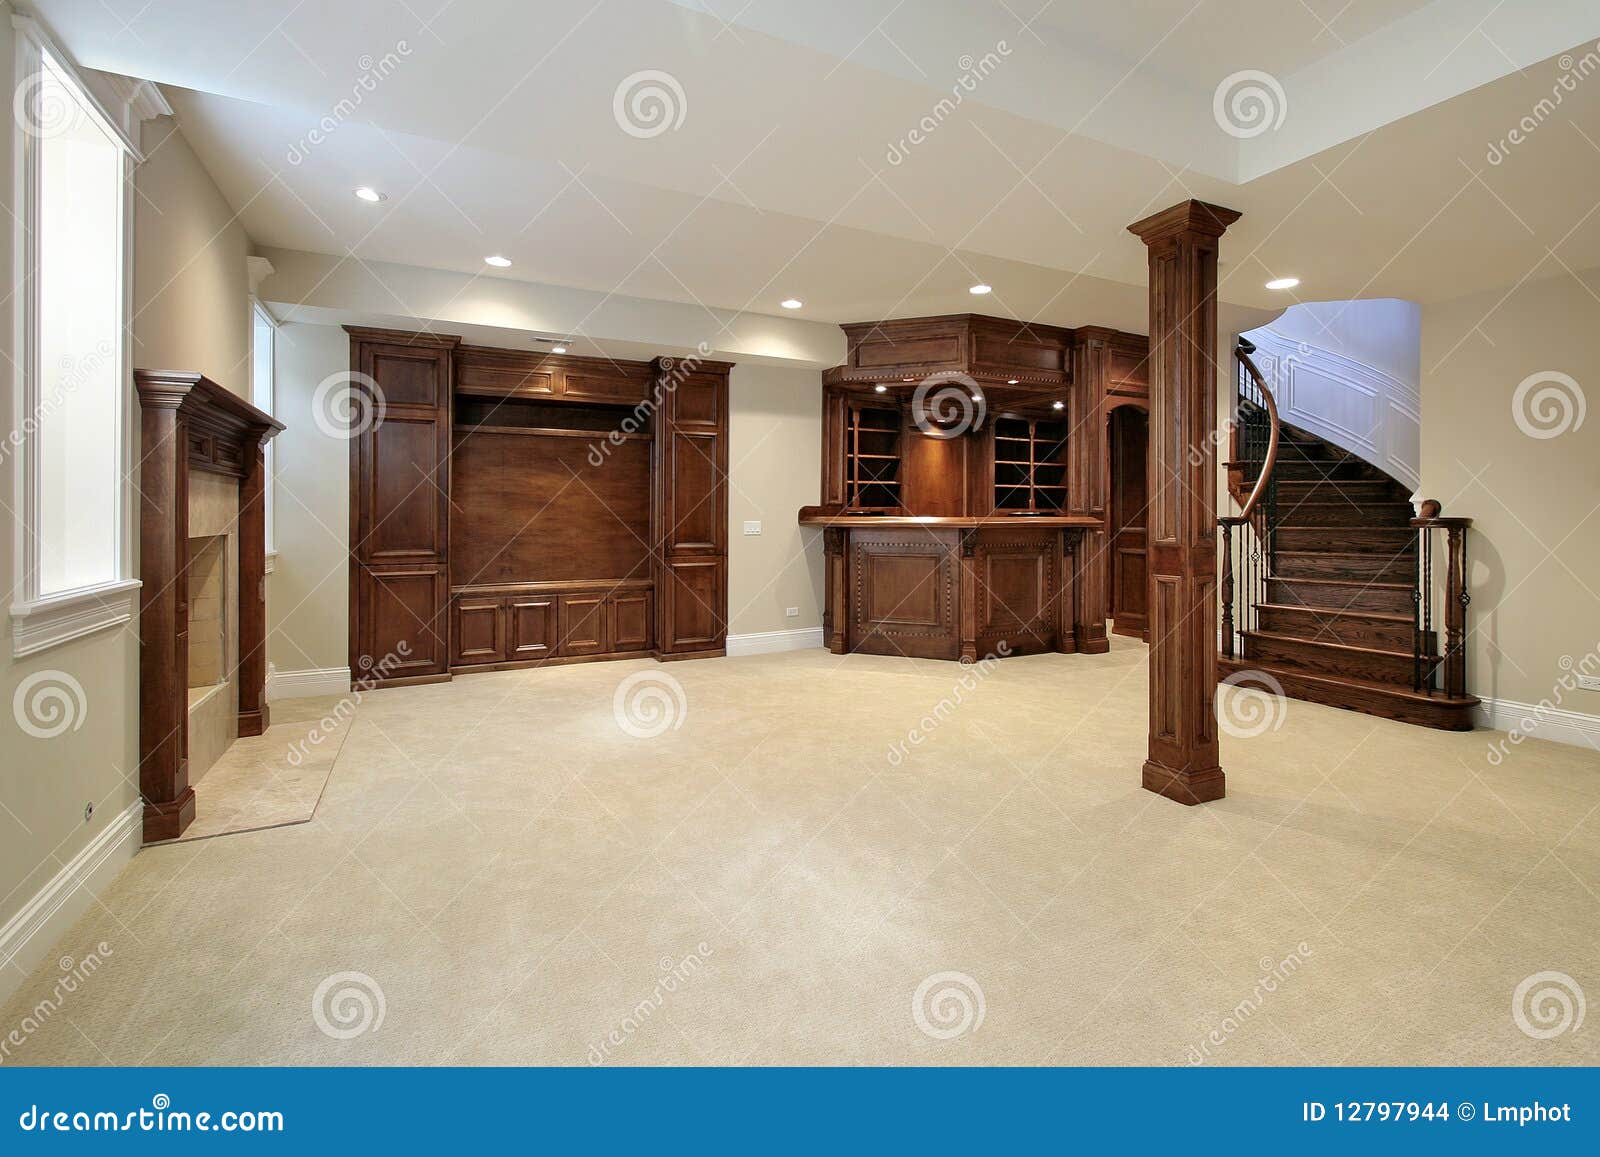 basement with wood cabinetry